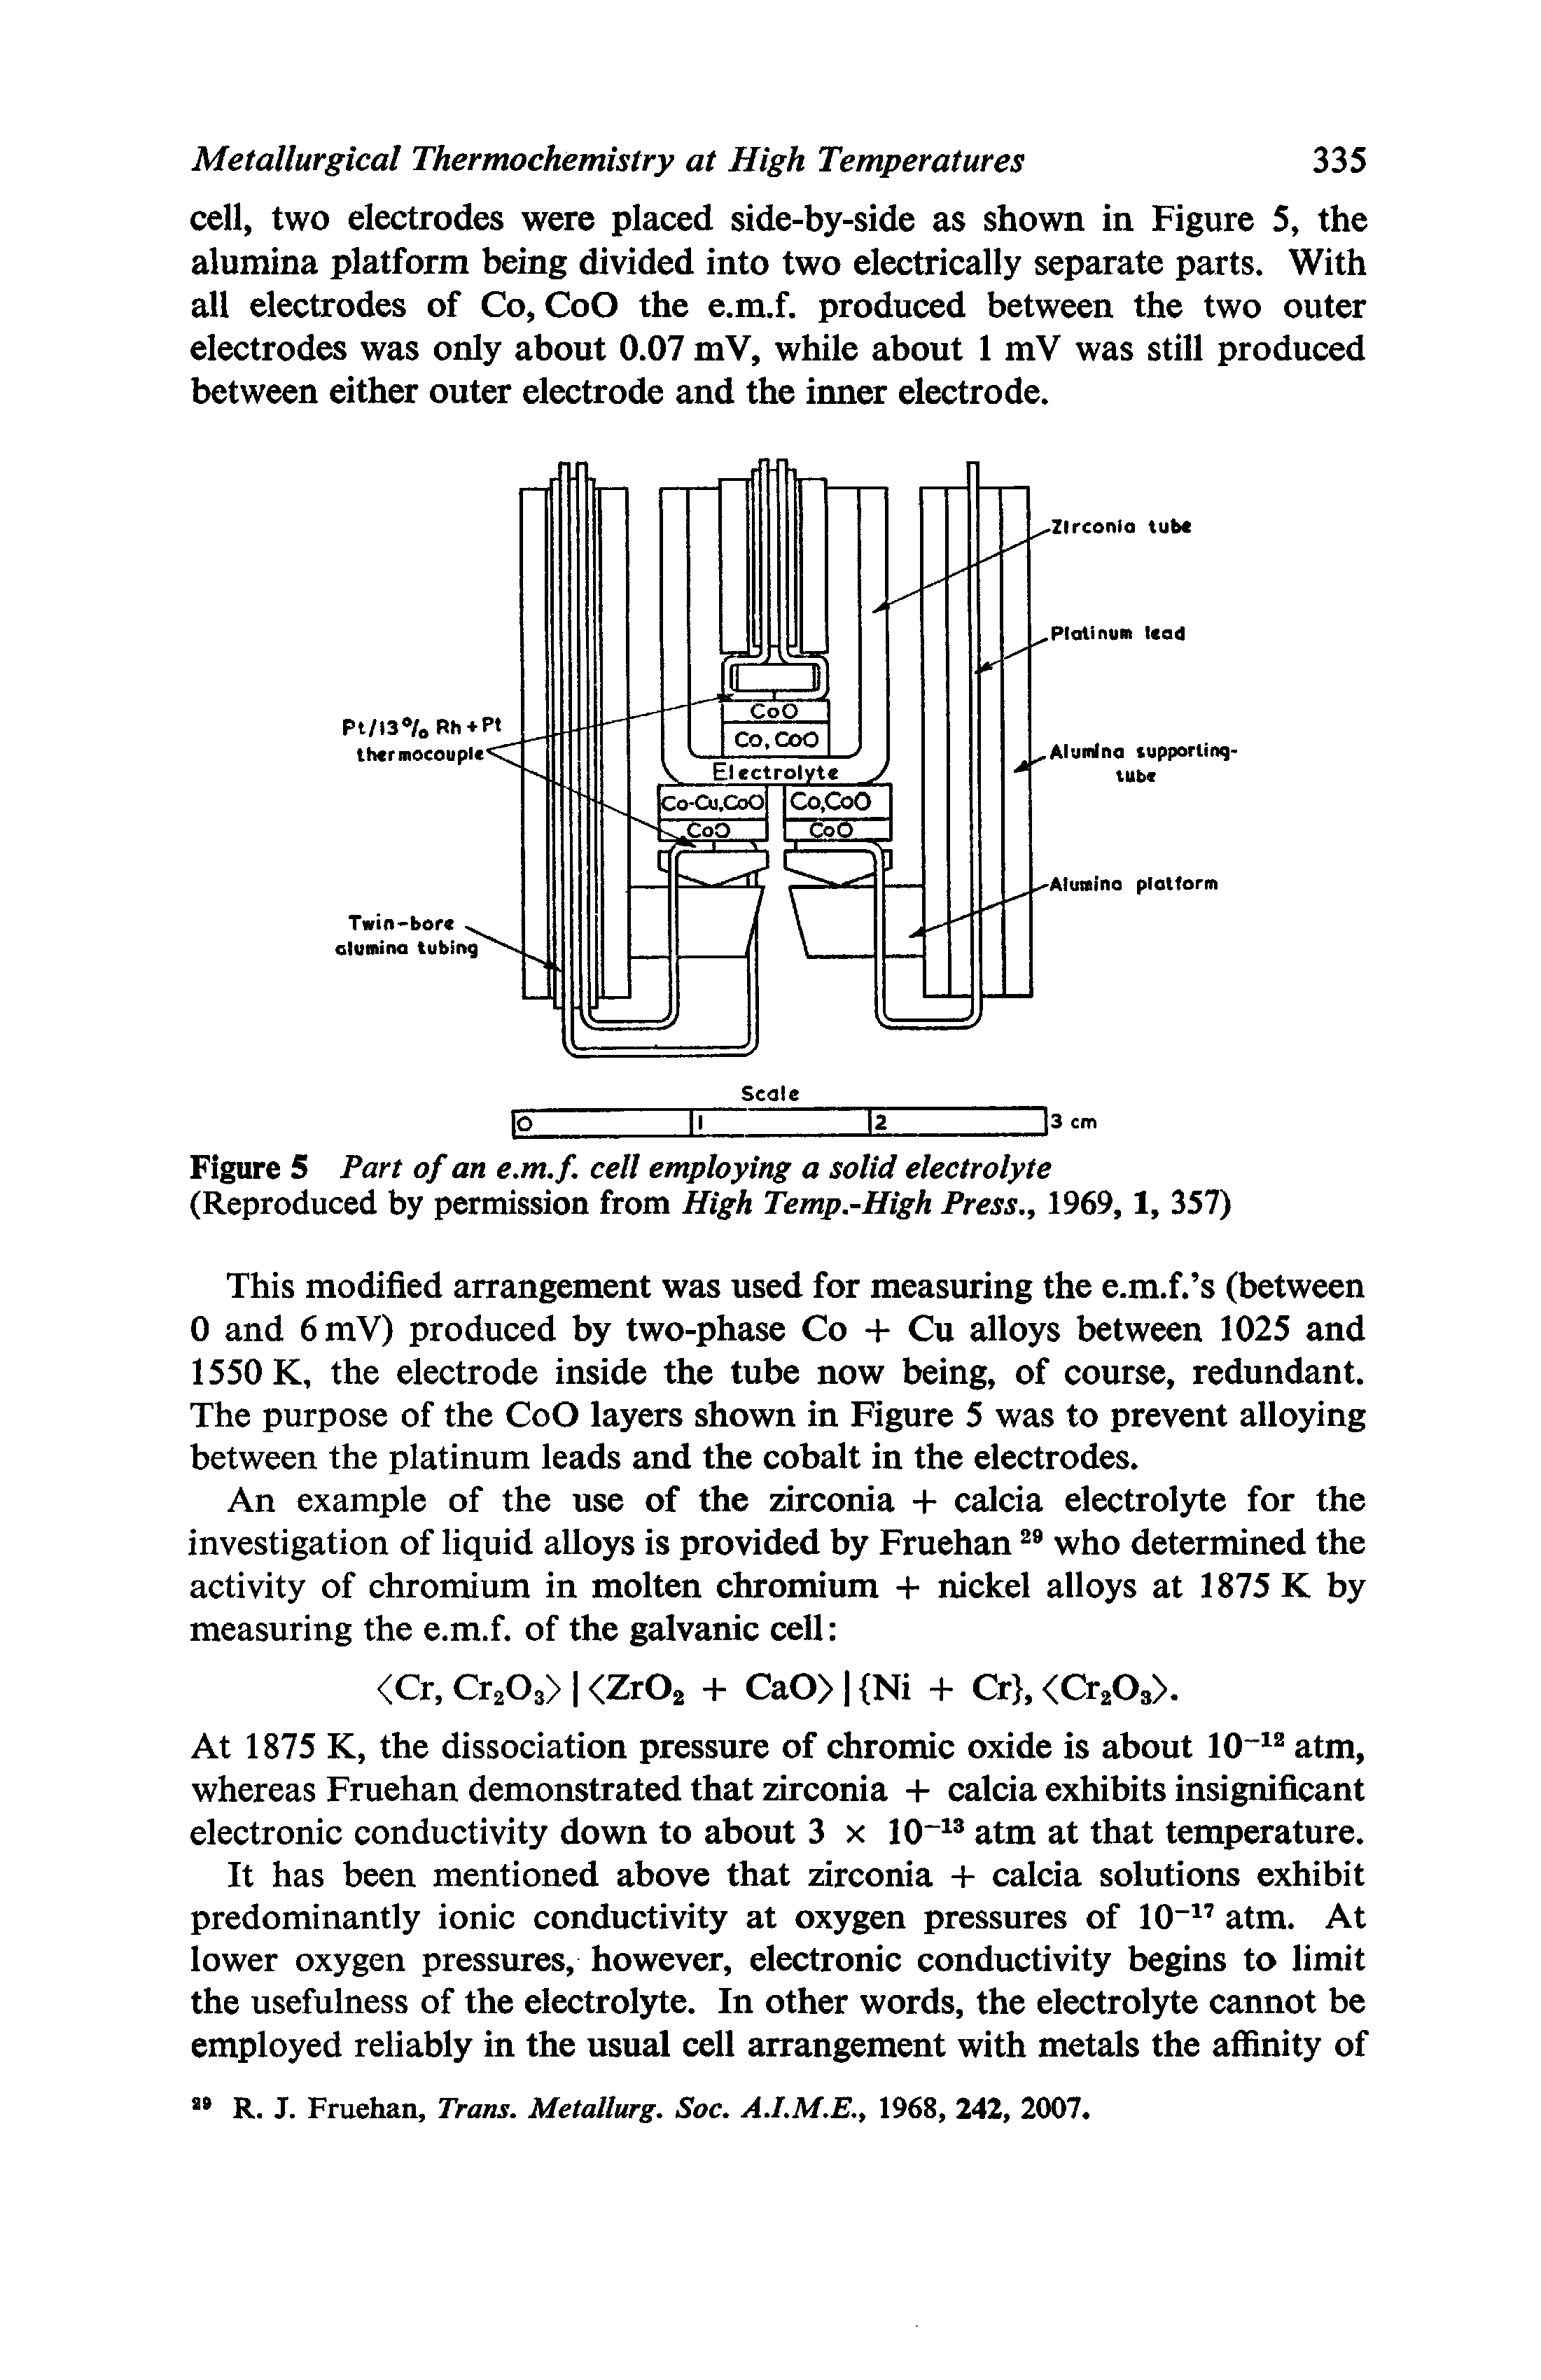 Figure 5 Part of an e.m.f. cell employing a solid electrolyte (Reproduced by permission from High Temp.-High Press, 1969, 1, 357)...